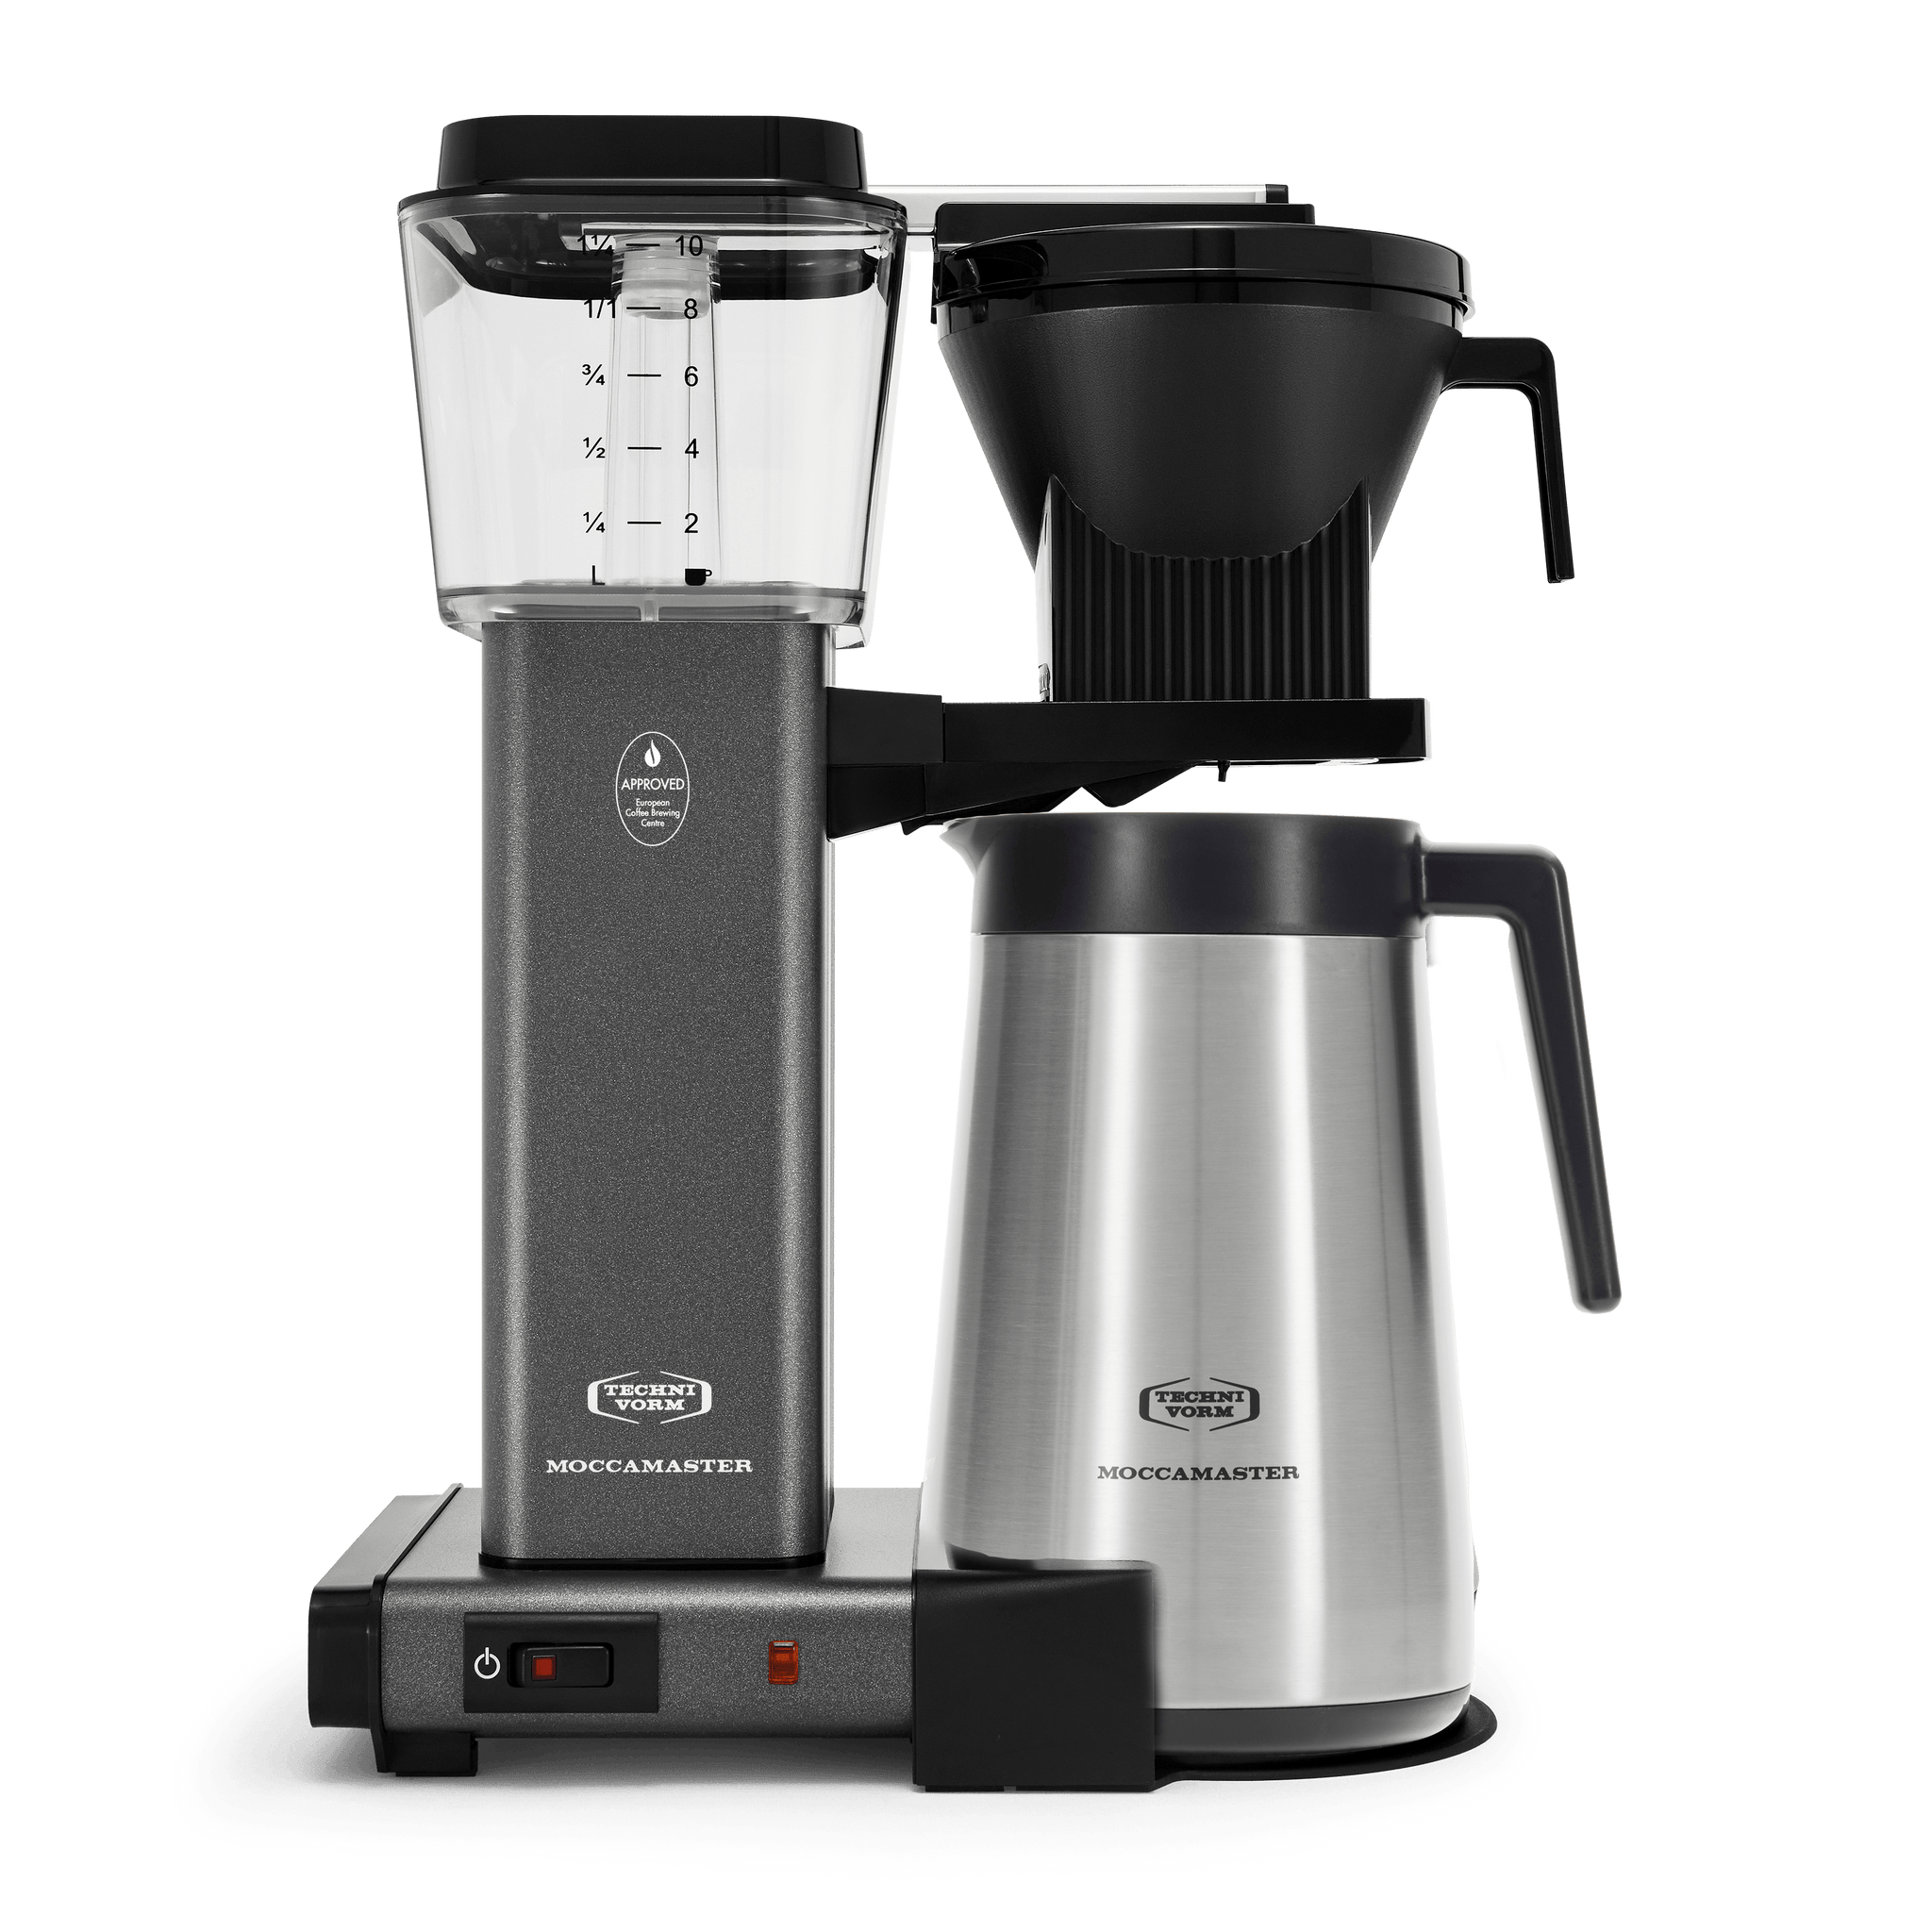 Drip-Stop Automatic - Pour Moccamaster Over USA Maker: Moccamaster KBGT Coffee Brewer